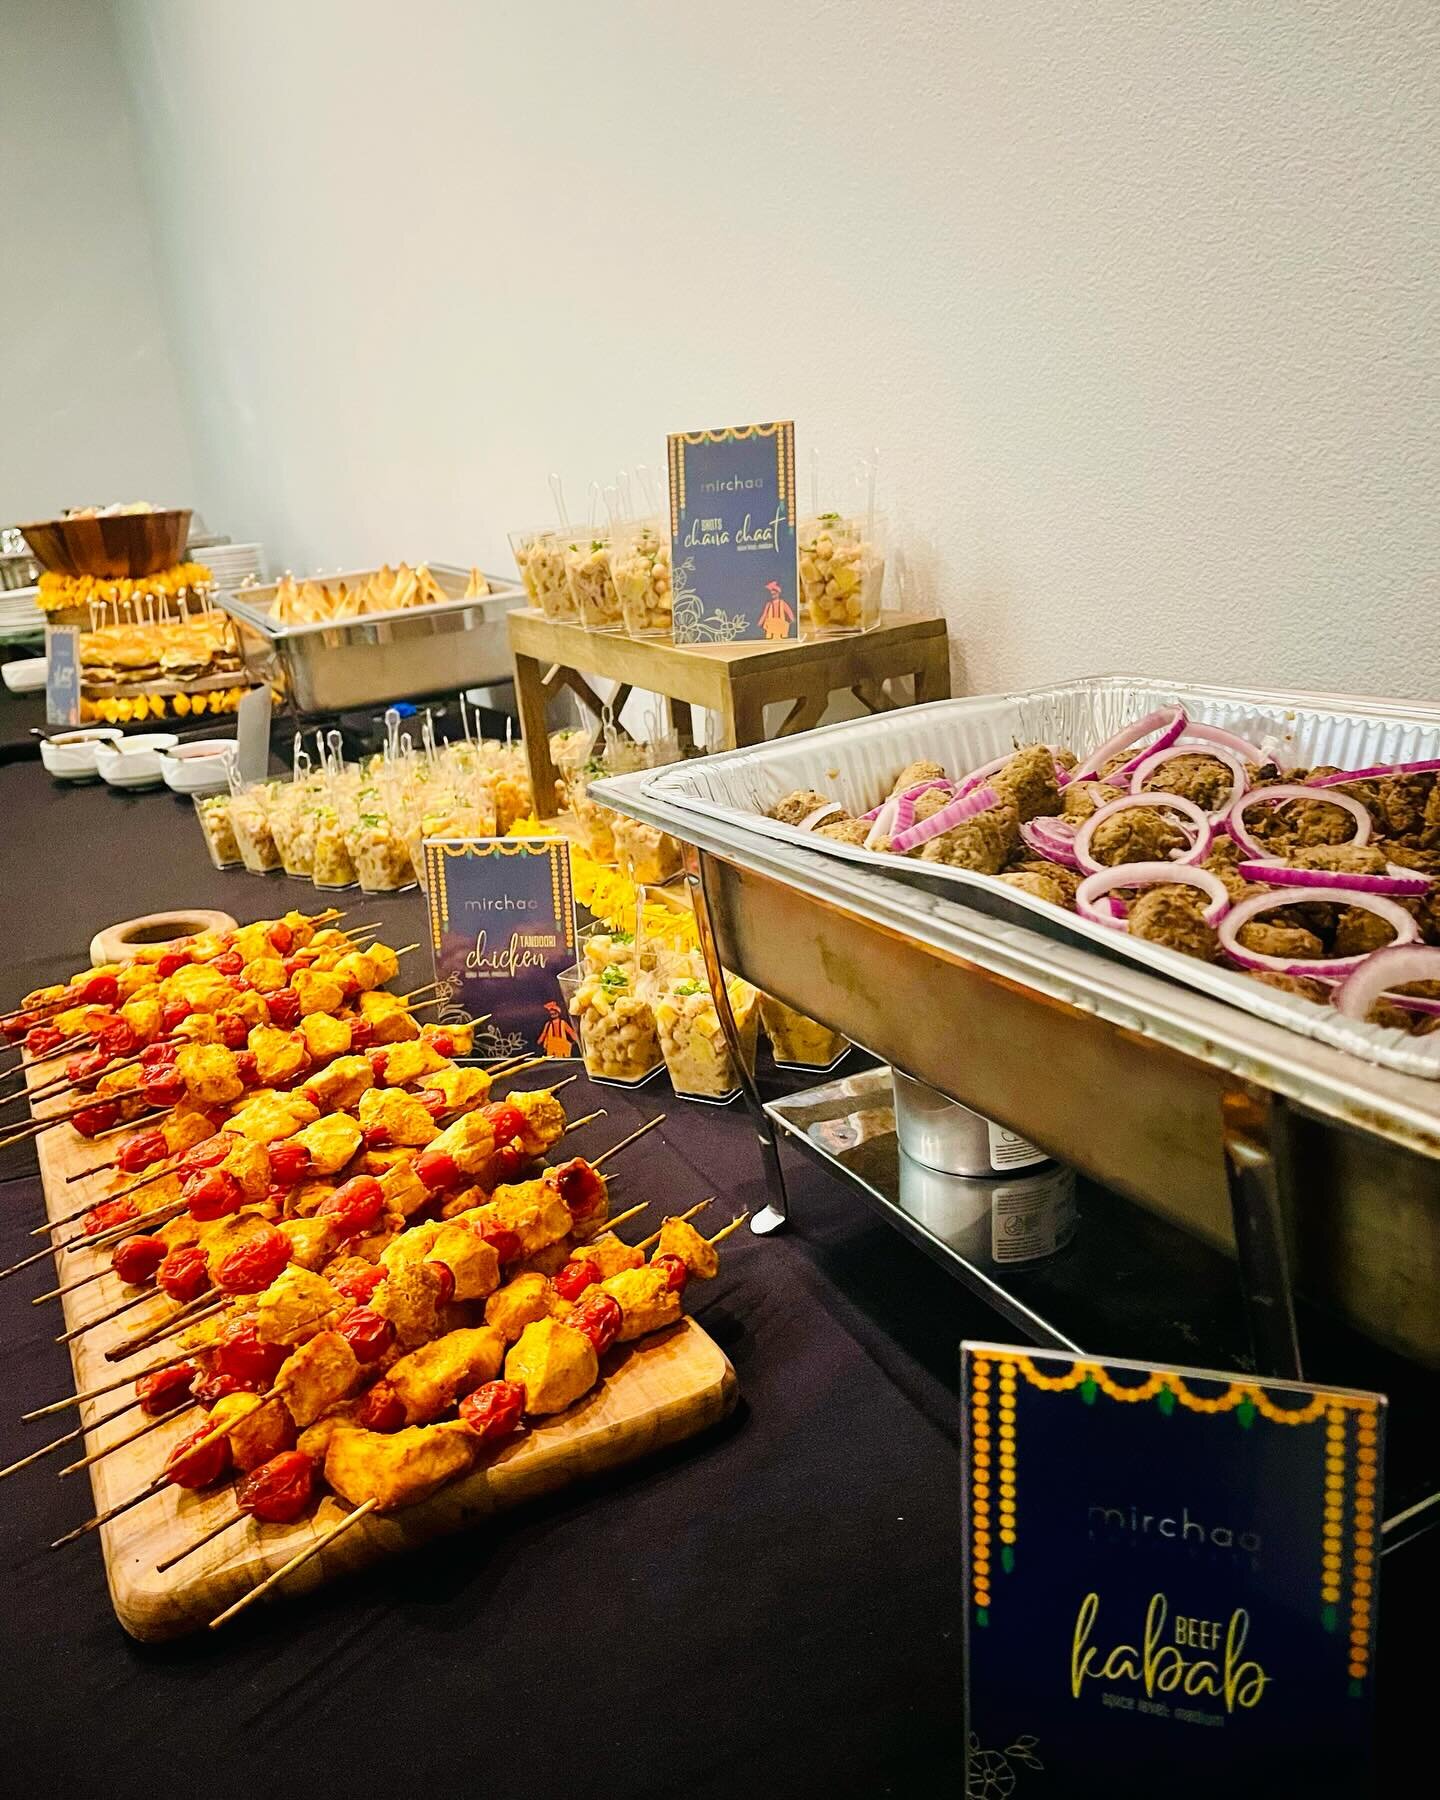 Small Bites. Big Flavor. Appetizers ✅ right at our latest event.  In pictures: Tandoori BBQ Chicken Skewers, Karachi Street Style Bun Kabab Sliders, Chana Chaat Shots, Potato Samosas, Seekh Kabab Bites. 
mirchaa.com/catering

#catering #indianfood #p